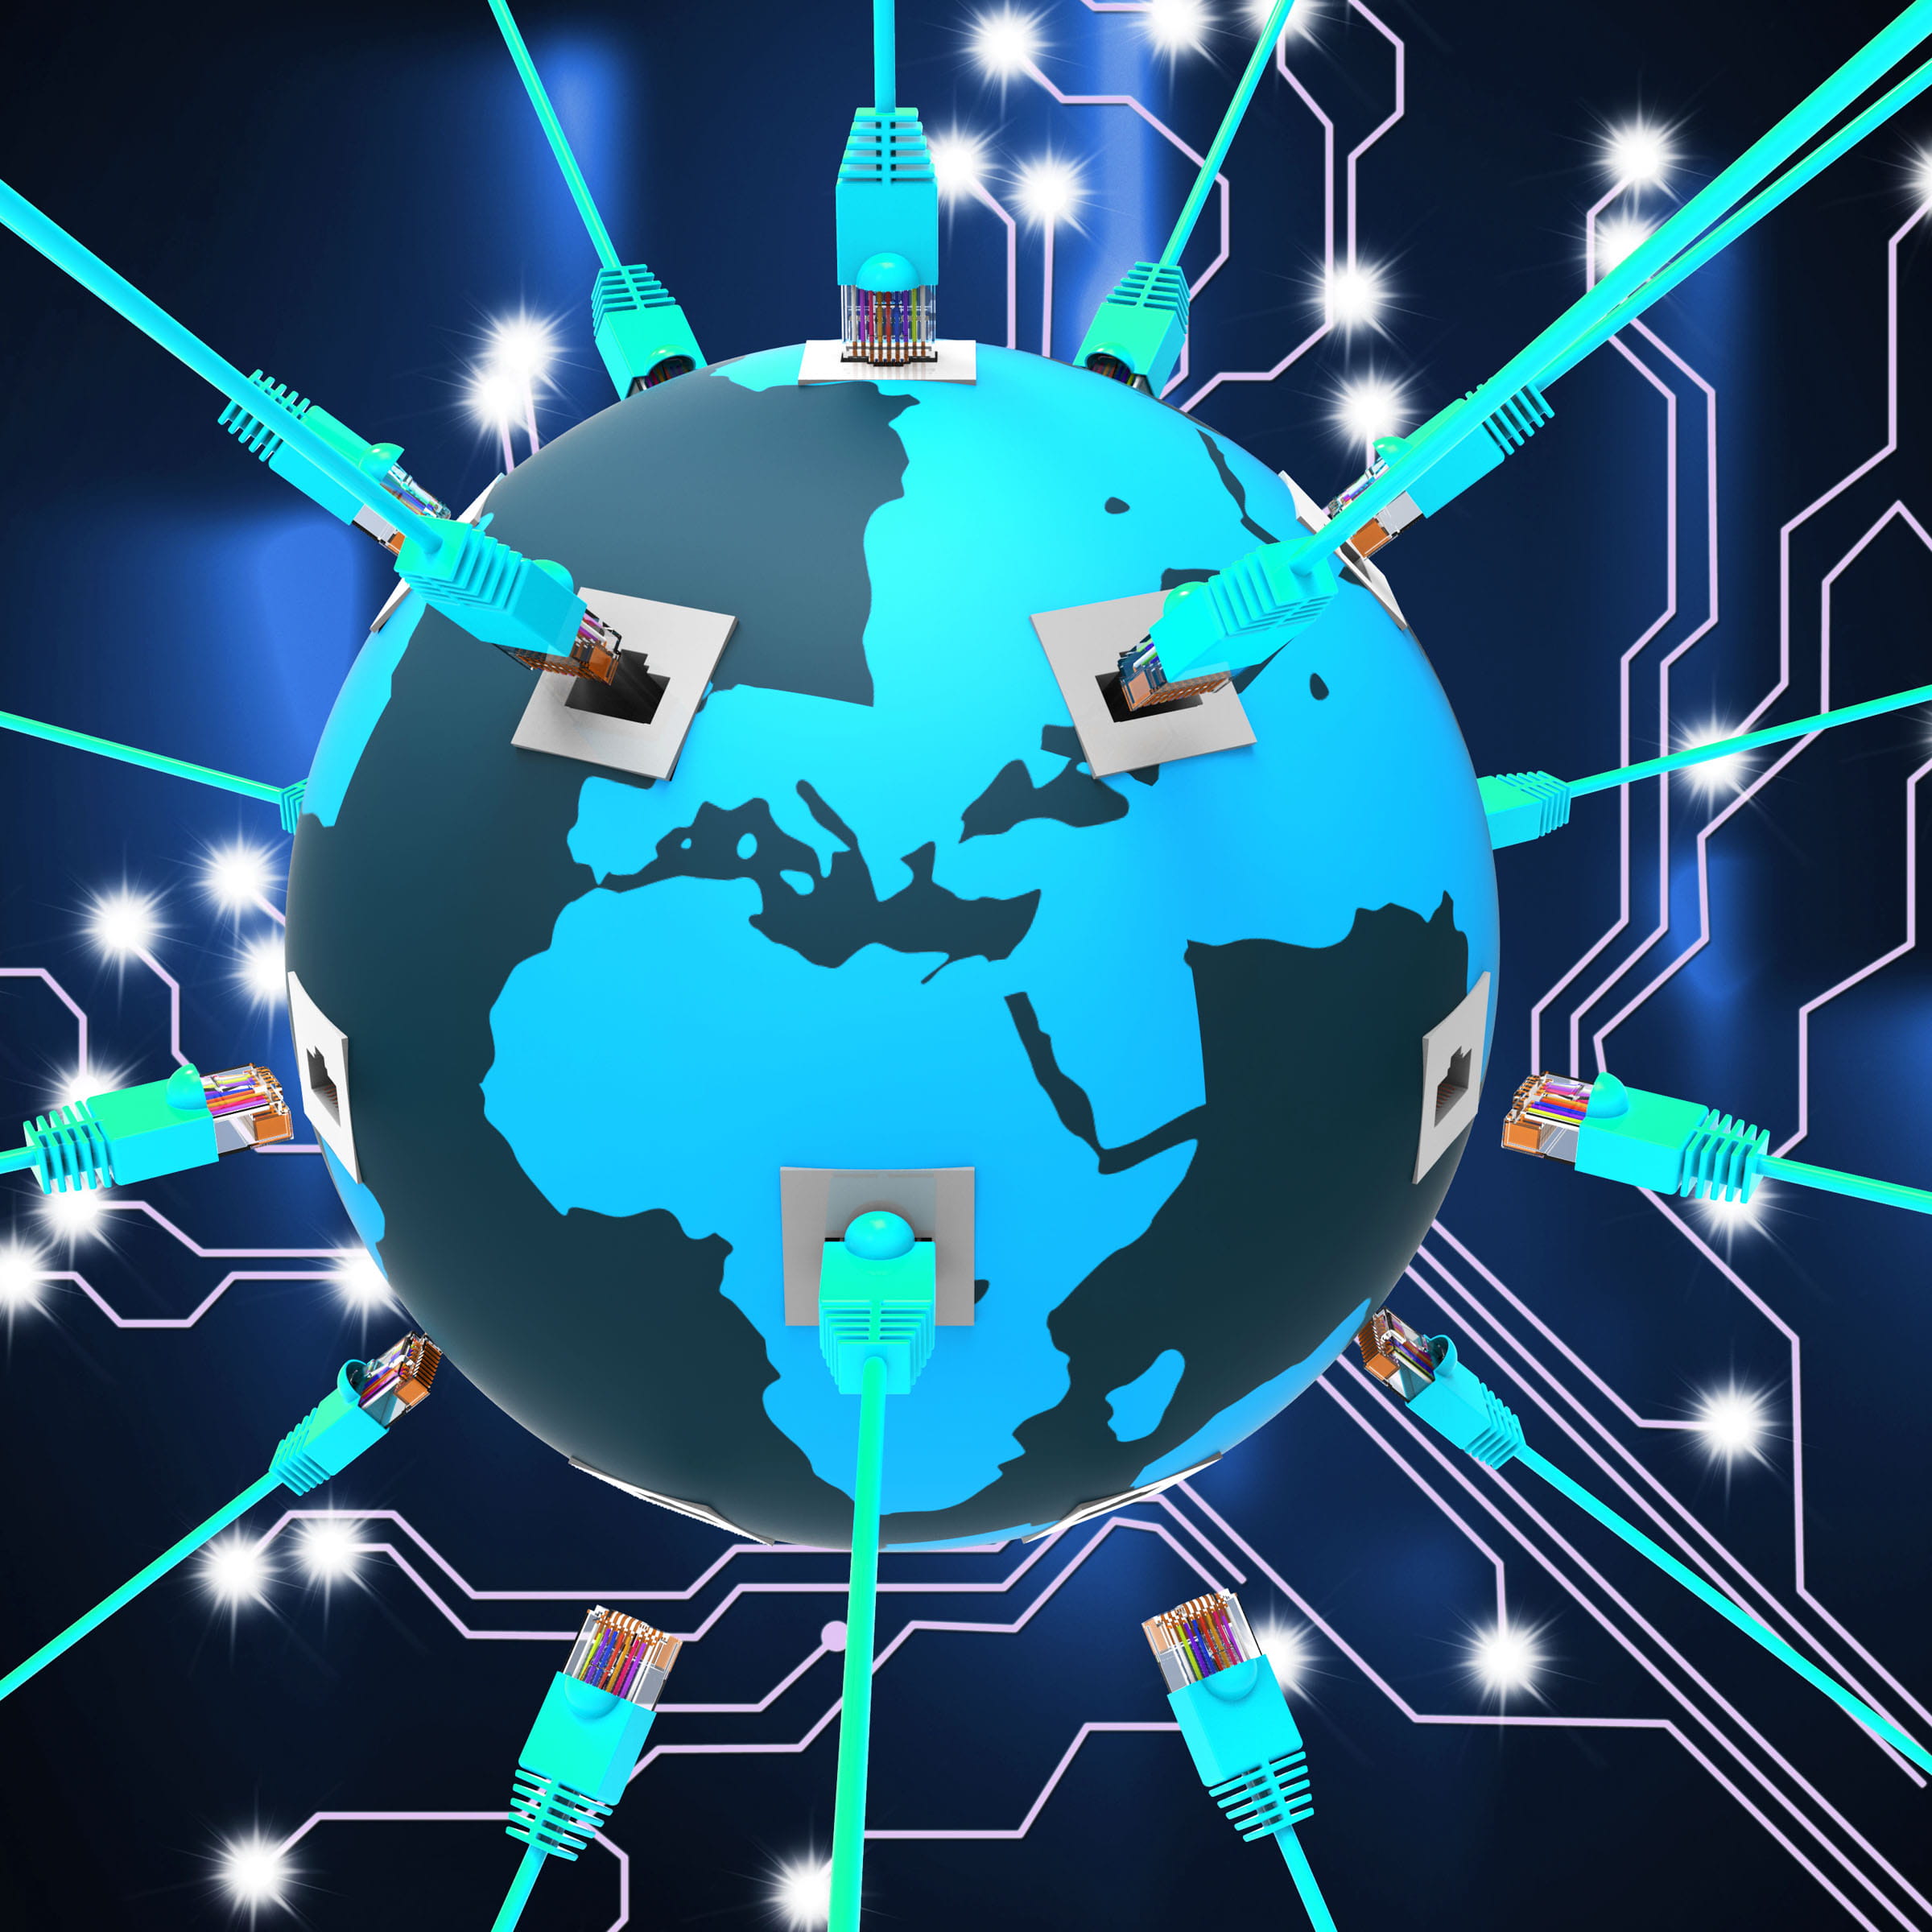 Worldwide Network Represents Global Communications And Connectio